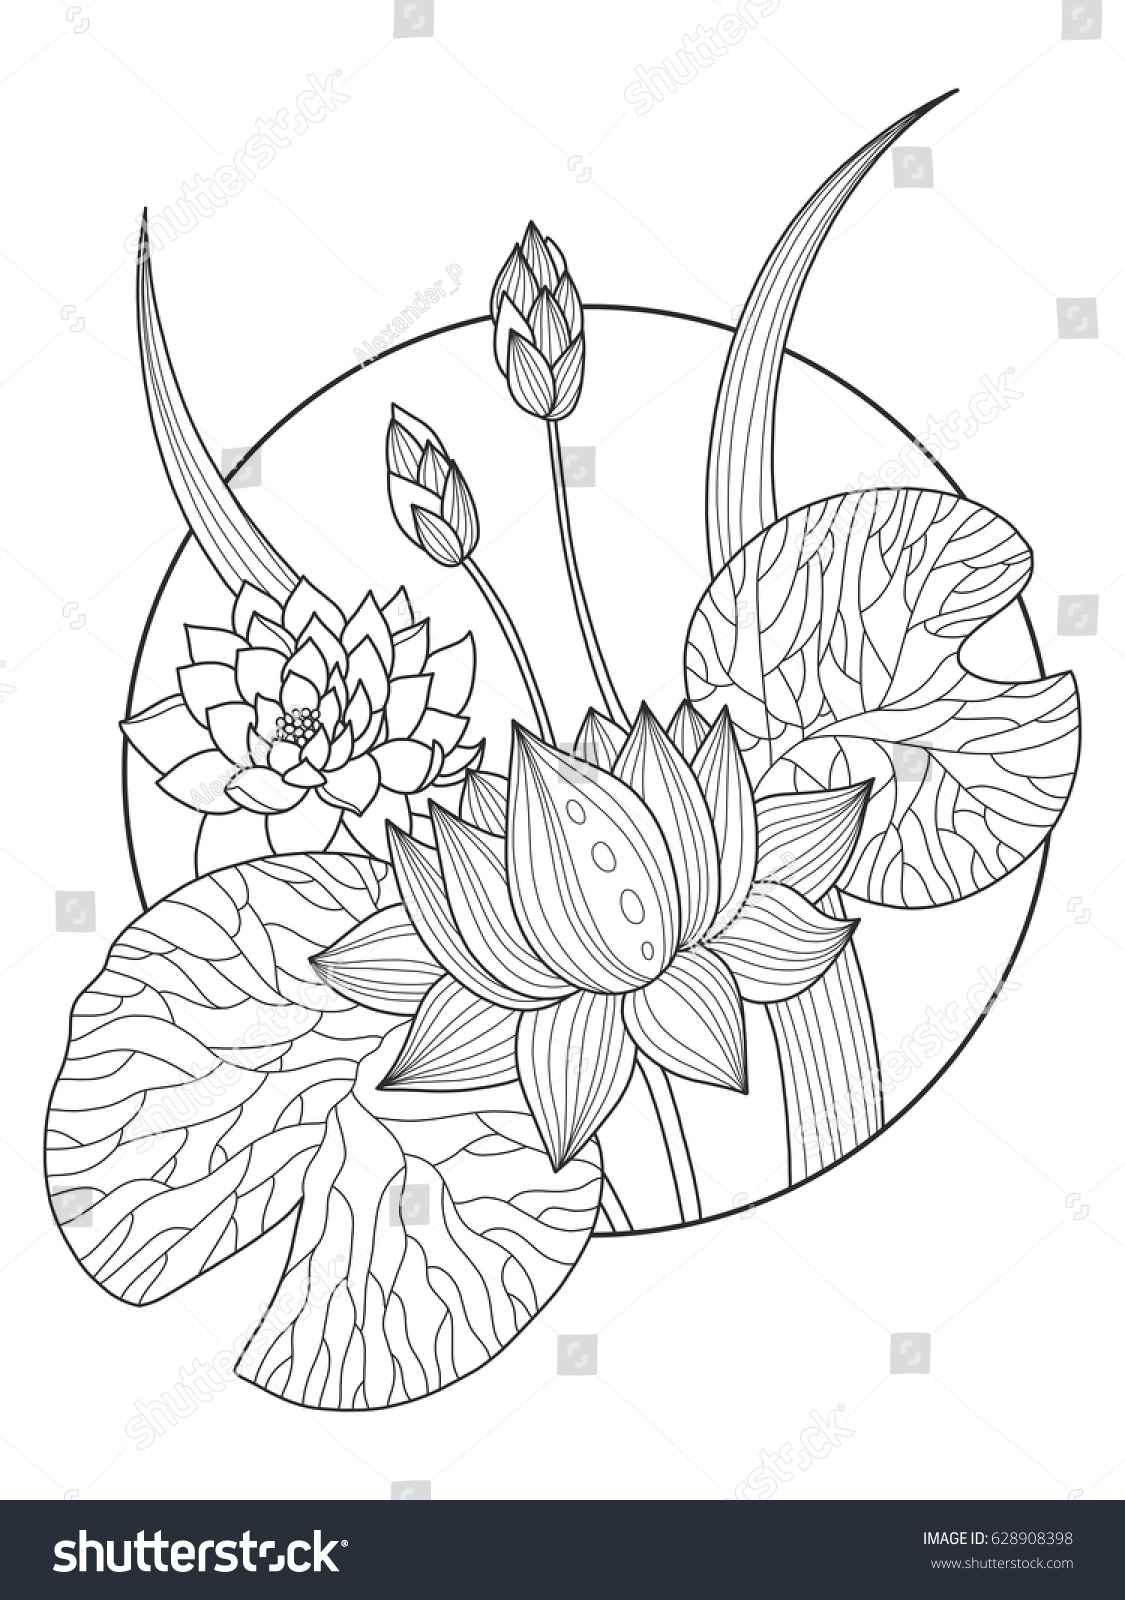 Lotus flower coloring book vector illustration stock vector royalty free